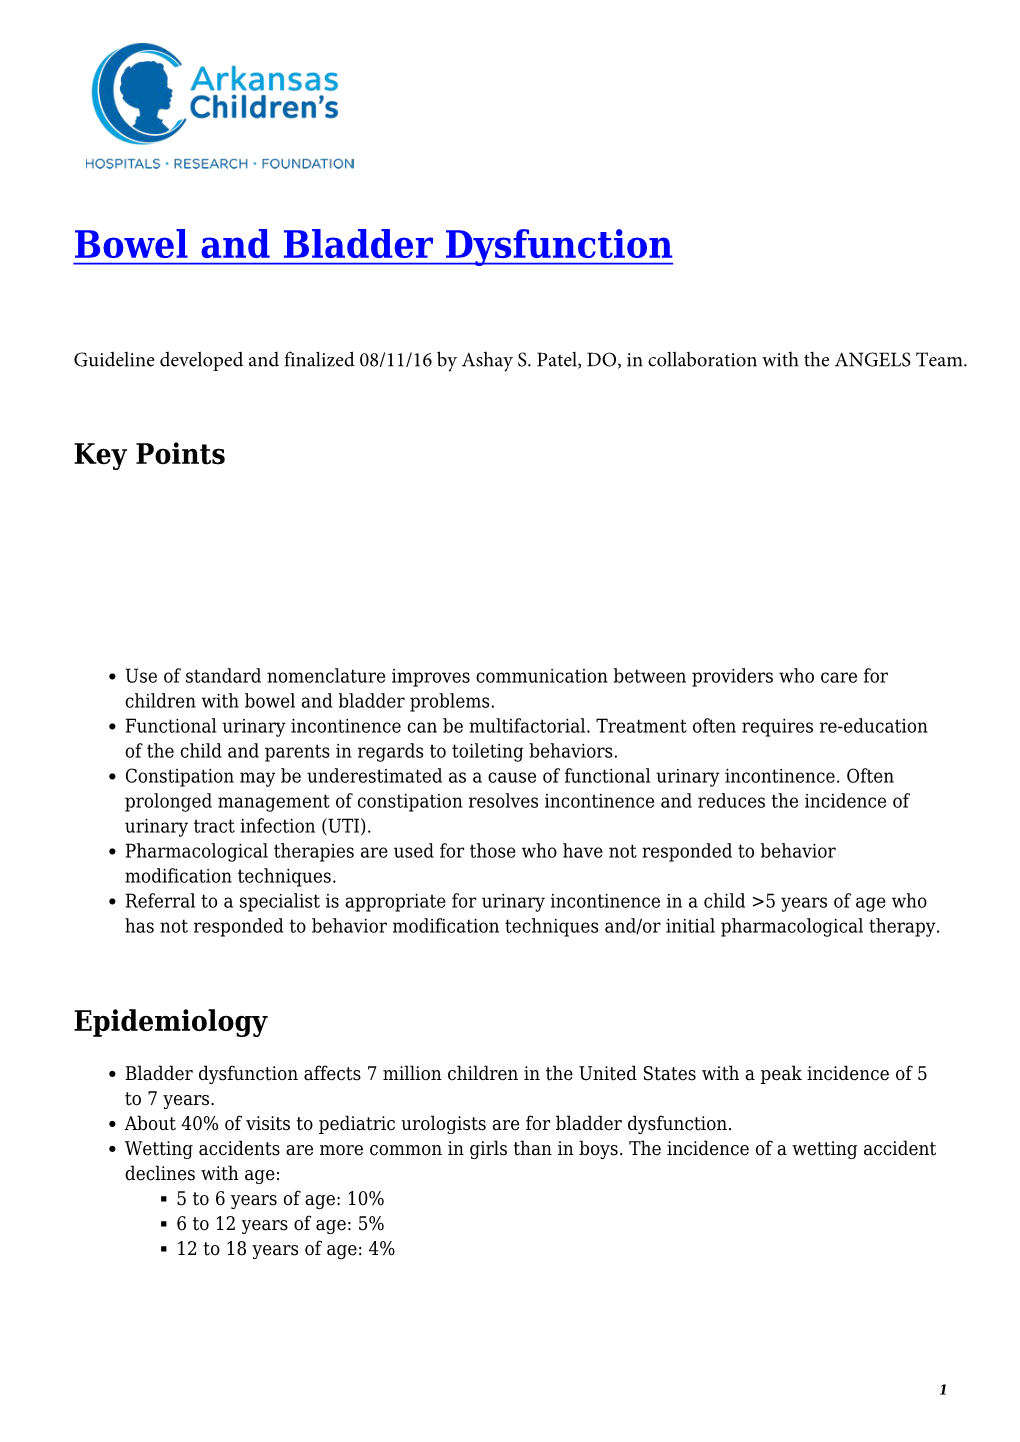 Bowel and Bladder Dysfunction